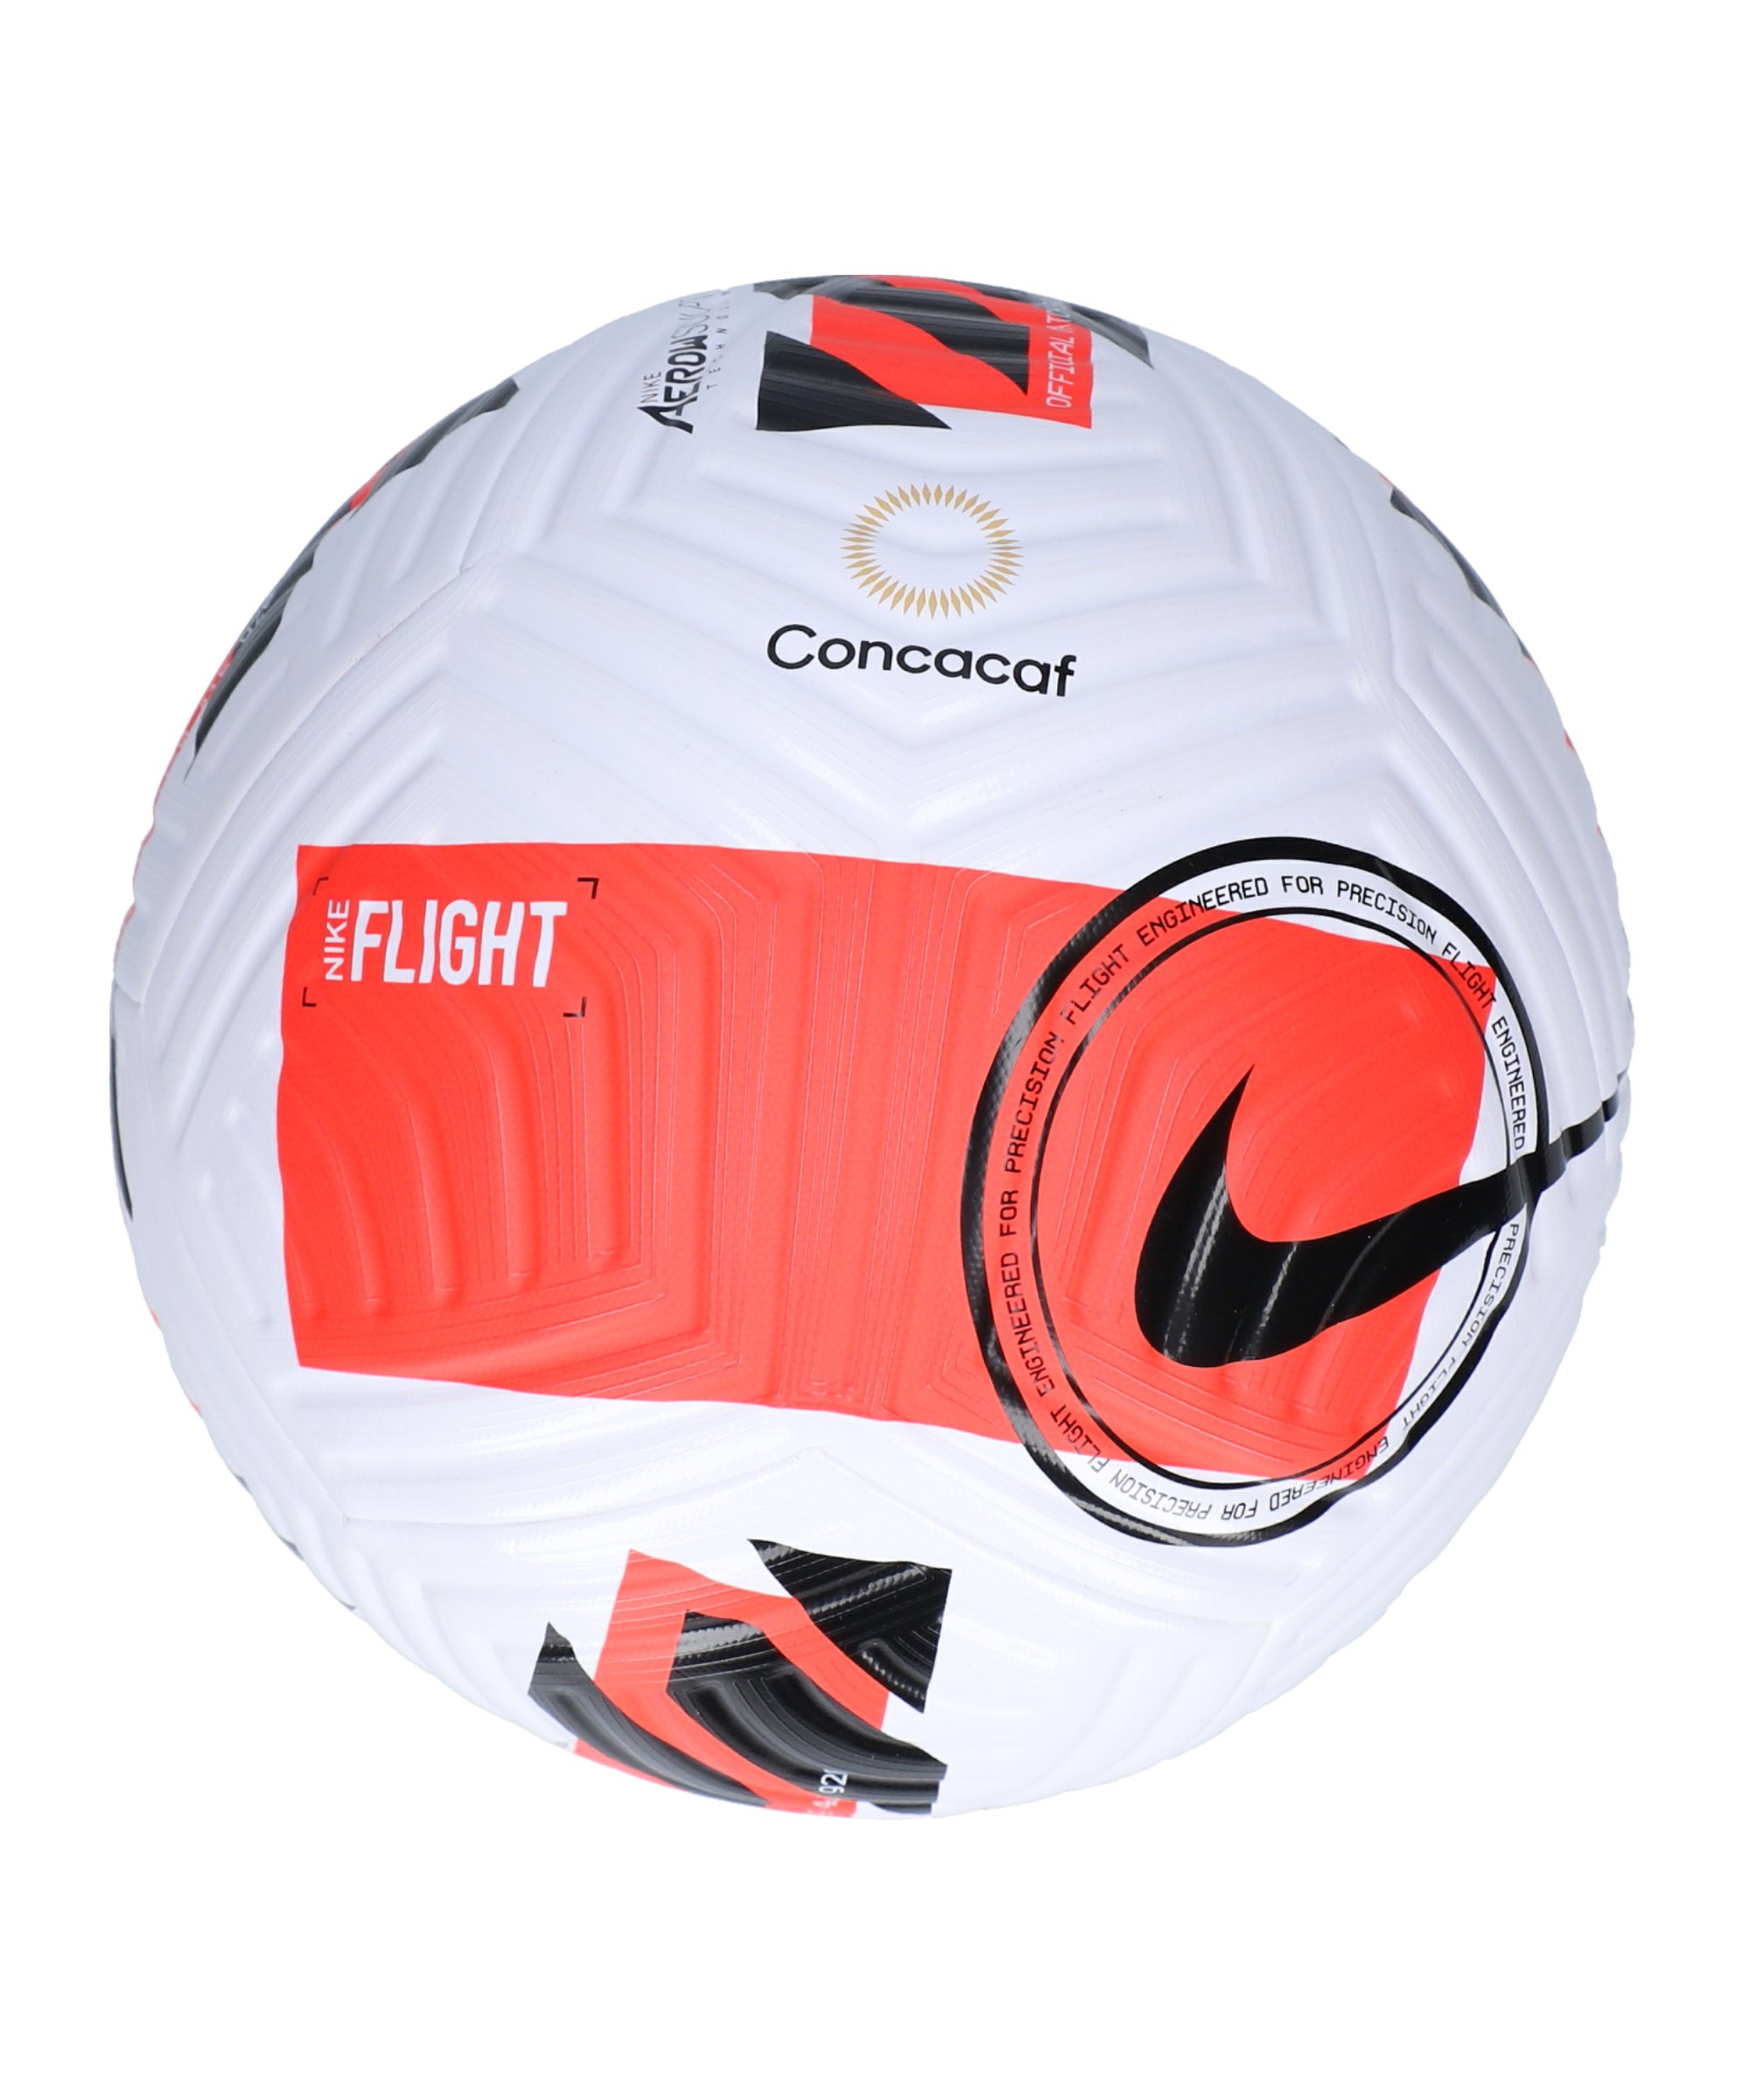 Nike Promo Flight Concacaf Spielball Weiss F100 - weiss